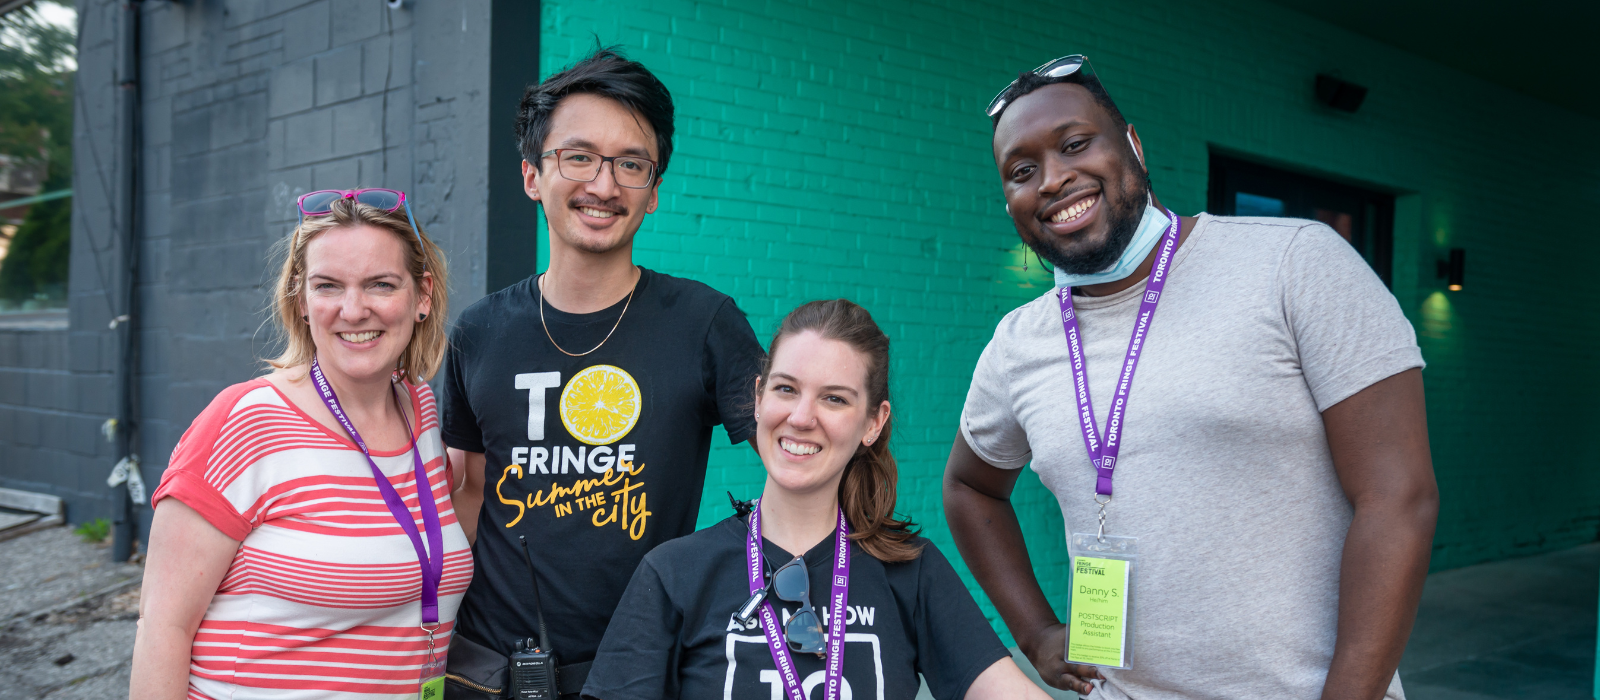 Four Fringe staff members stand together at the Patio, smiling at the camera, with their staff shirts and lanyards visible